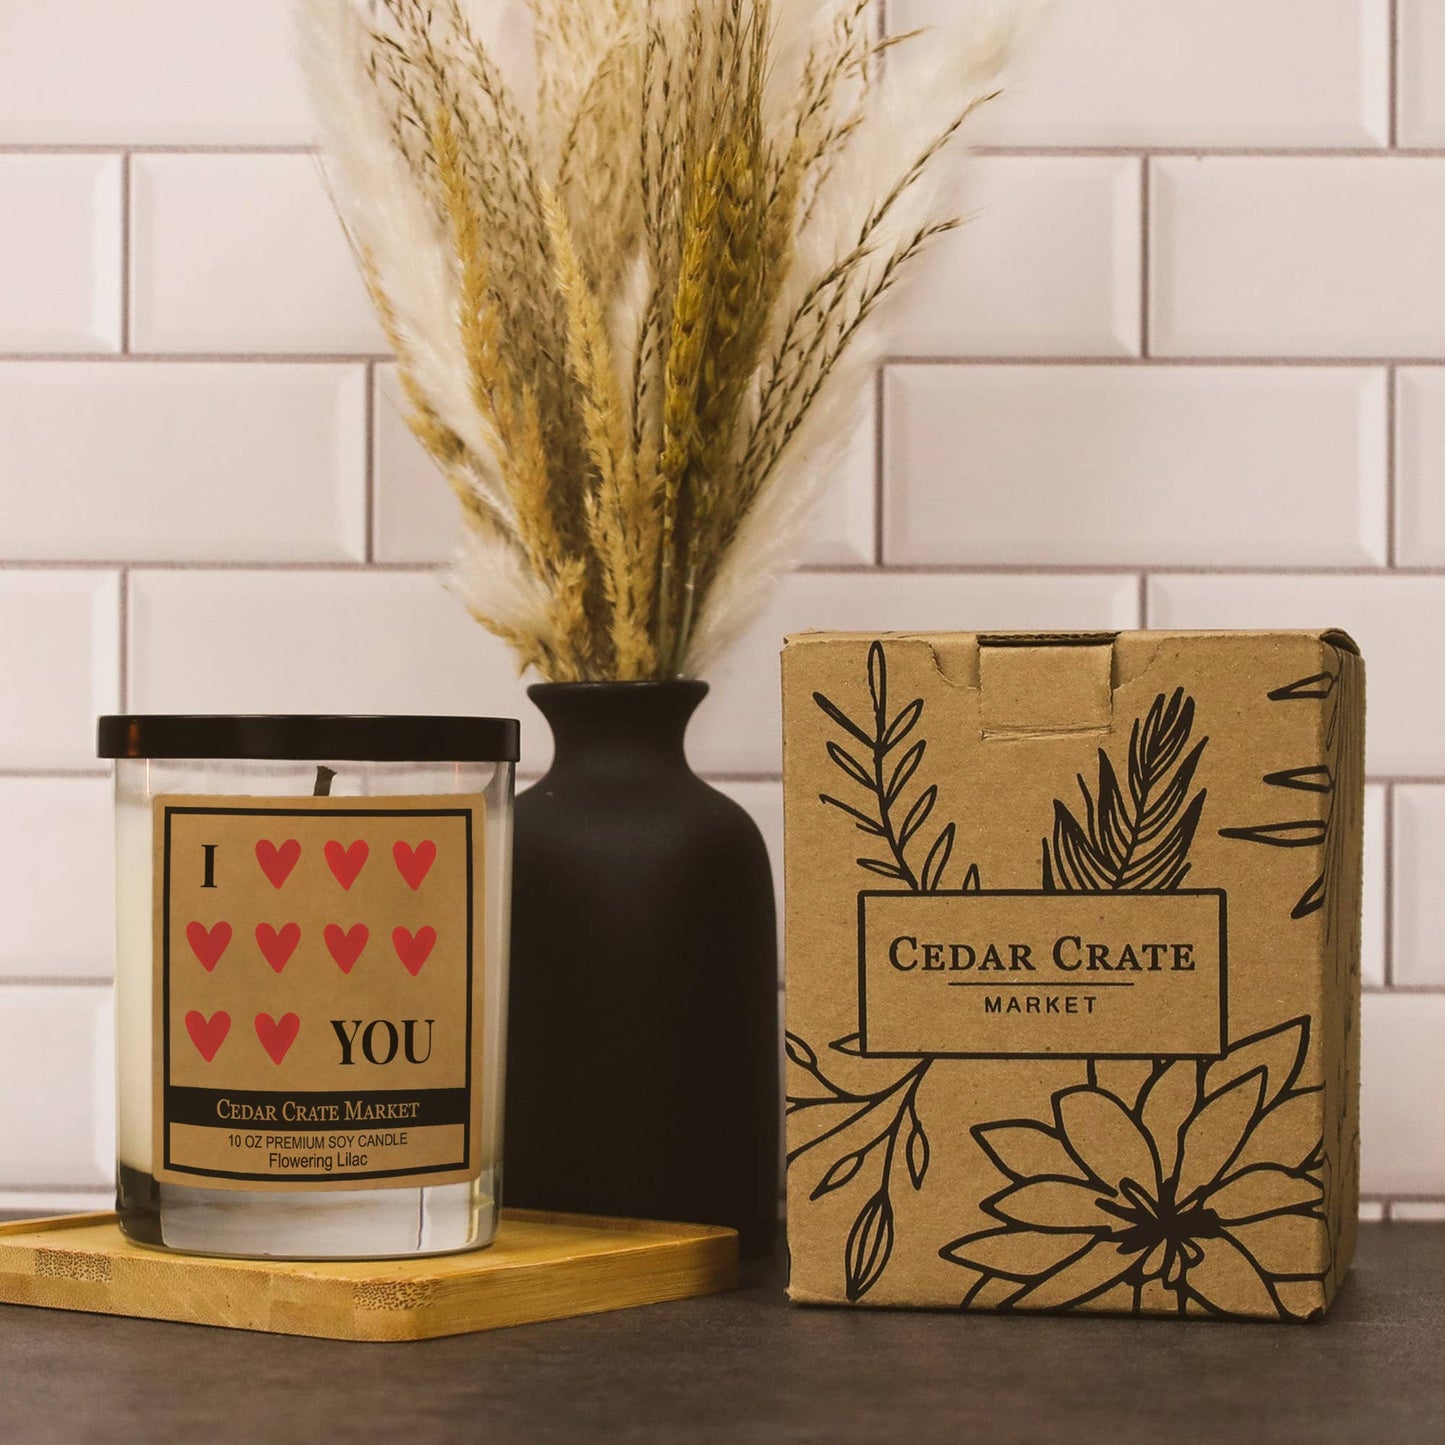 I (Heart) You Soy Candle Spring-Summer Cedar Crate Market